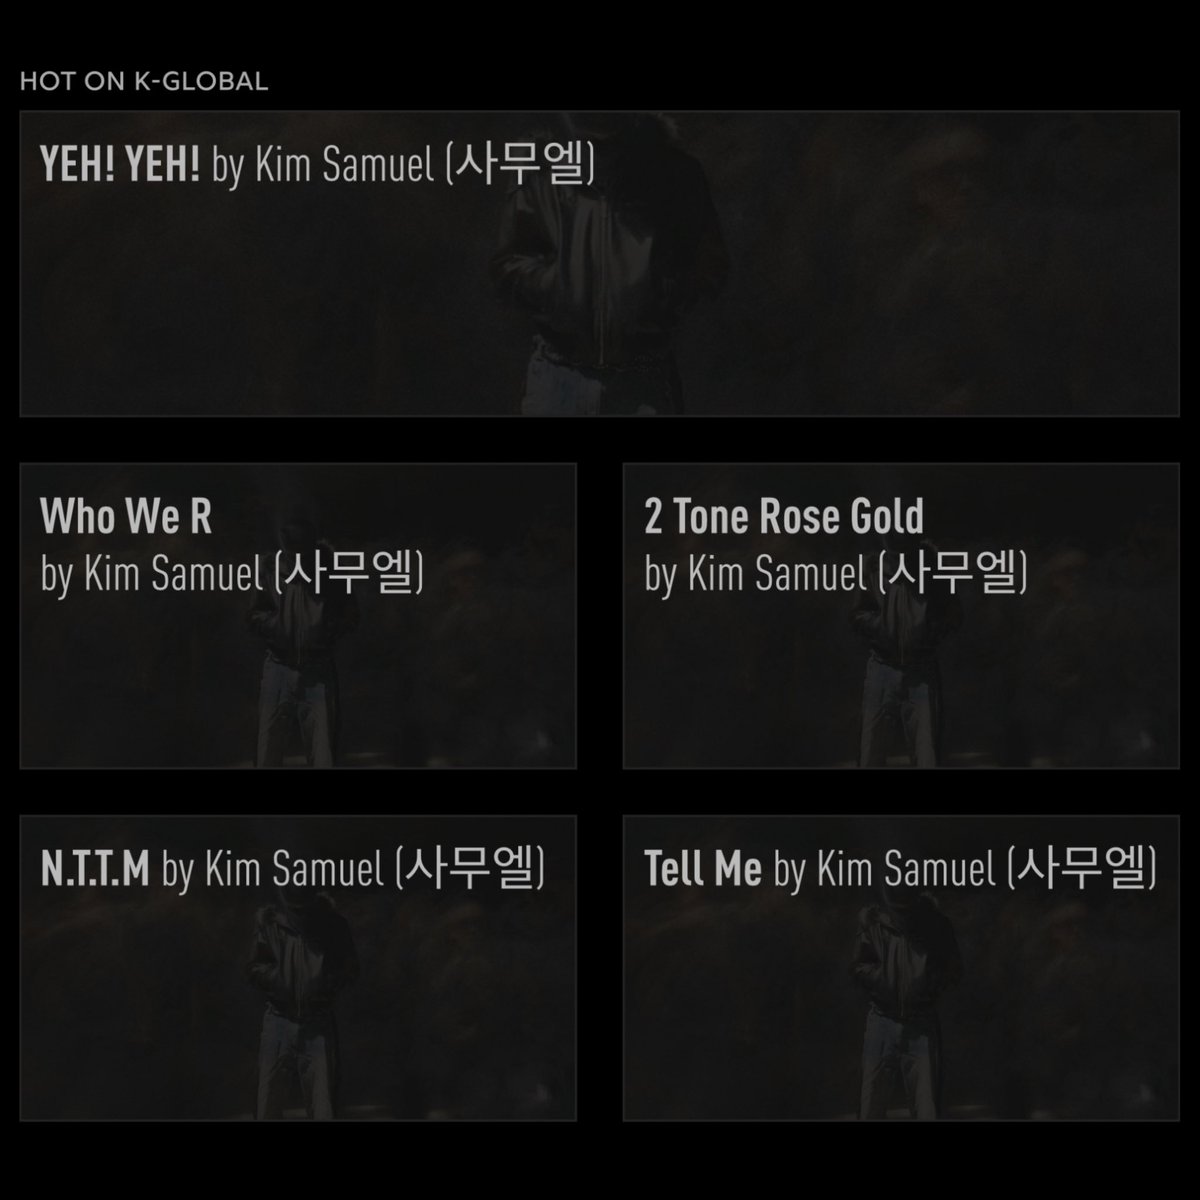 #GeniusCharts | As fans flood Genius to view the lyrics to his self-written album #NOW, Kim Samuel (@ksamuelofficial) takes over the daily K-Global chart in Genius Korea! 

His lead single “YEH! YEH!” debuts at #1 followed by “Who We R,” “2 Tone Rose Gold,” “N.T.T.M,” and “Tell